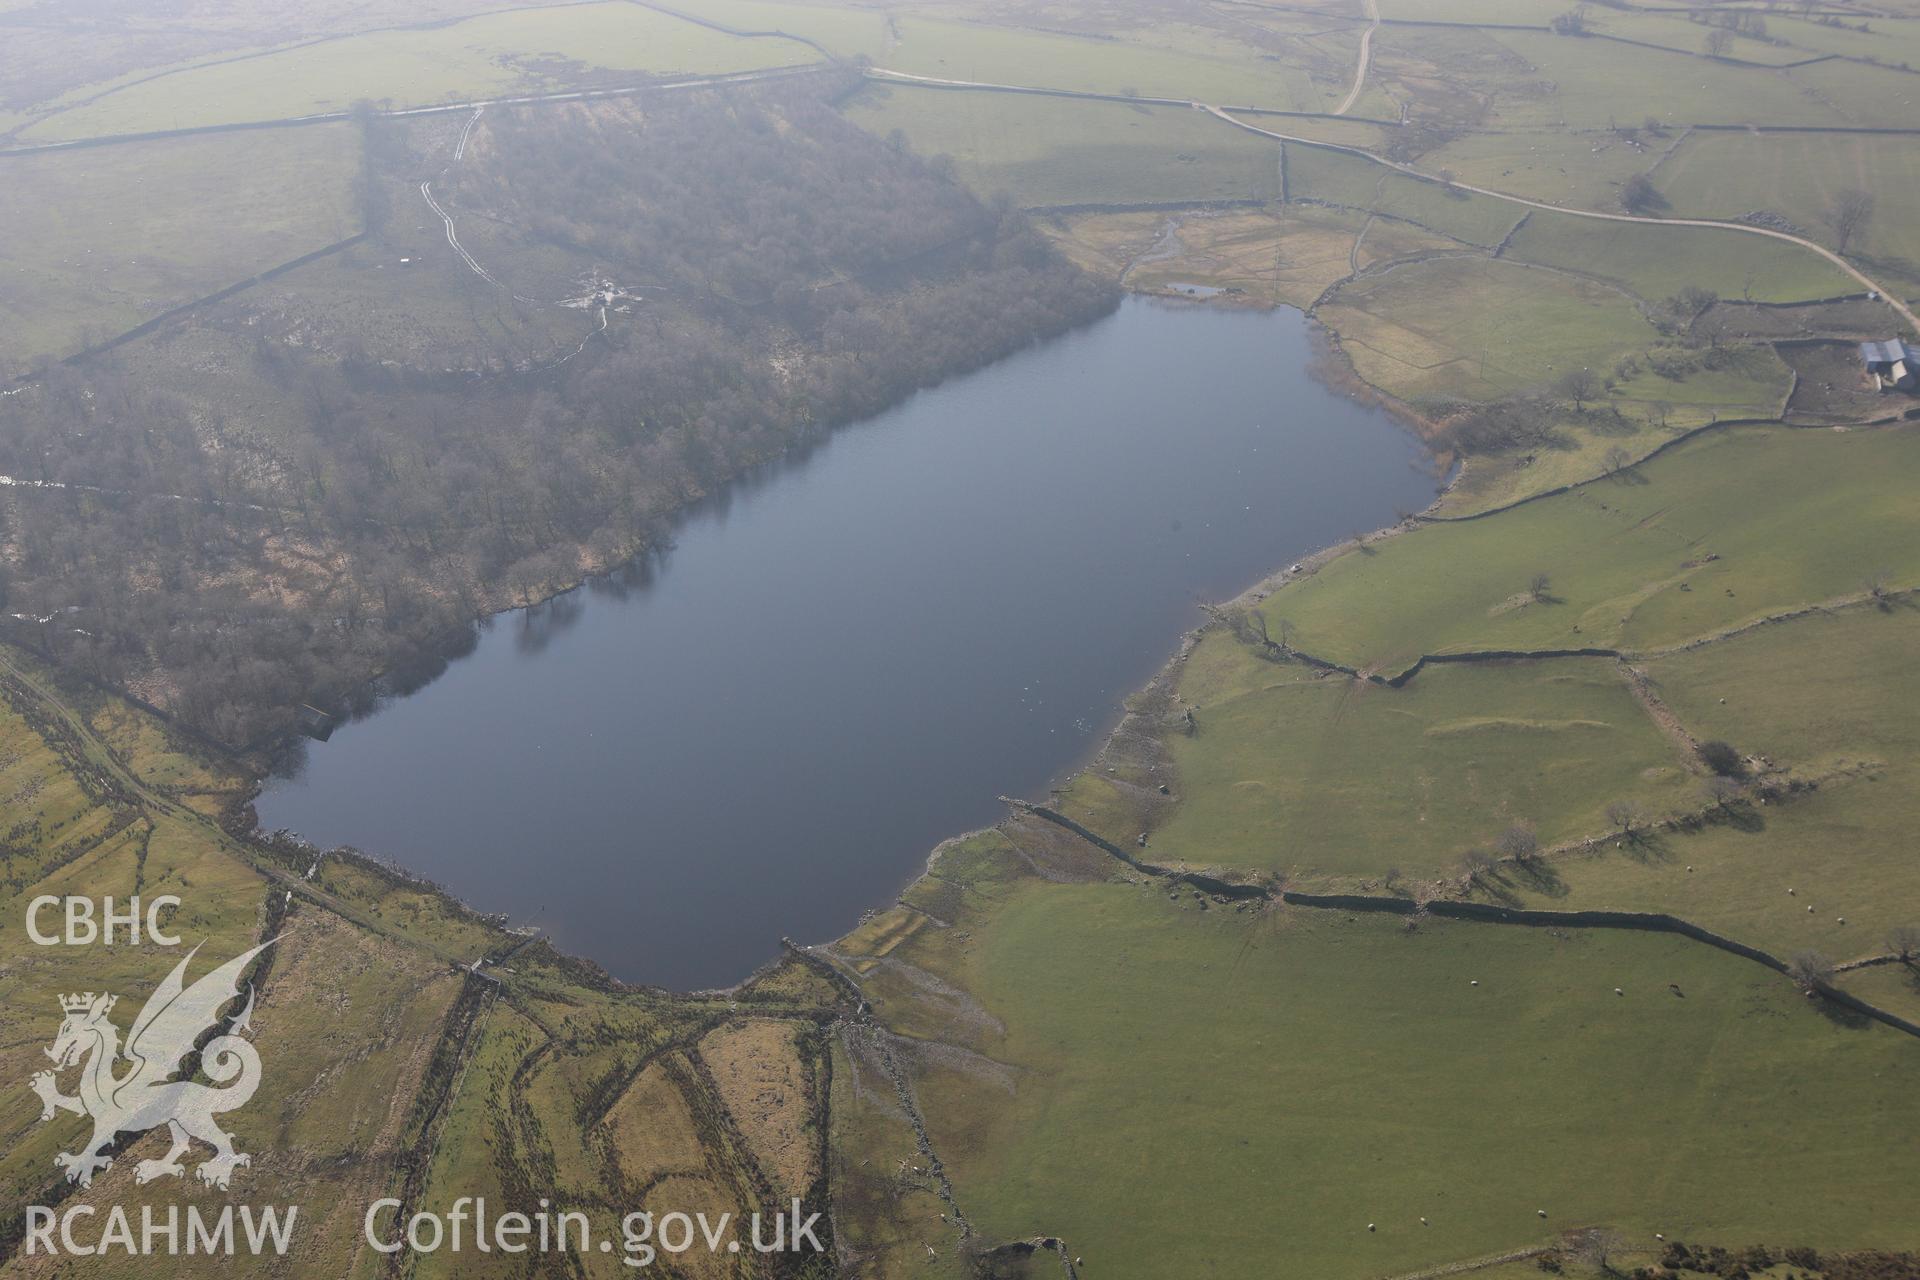 RCAHMW colour oblique photograph of Llyn y Cwrt lake,. Taken by Toby Driver on 18/03/2009.